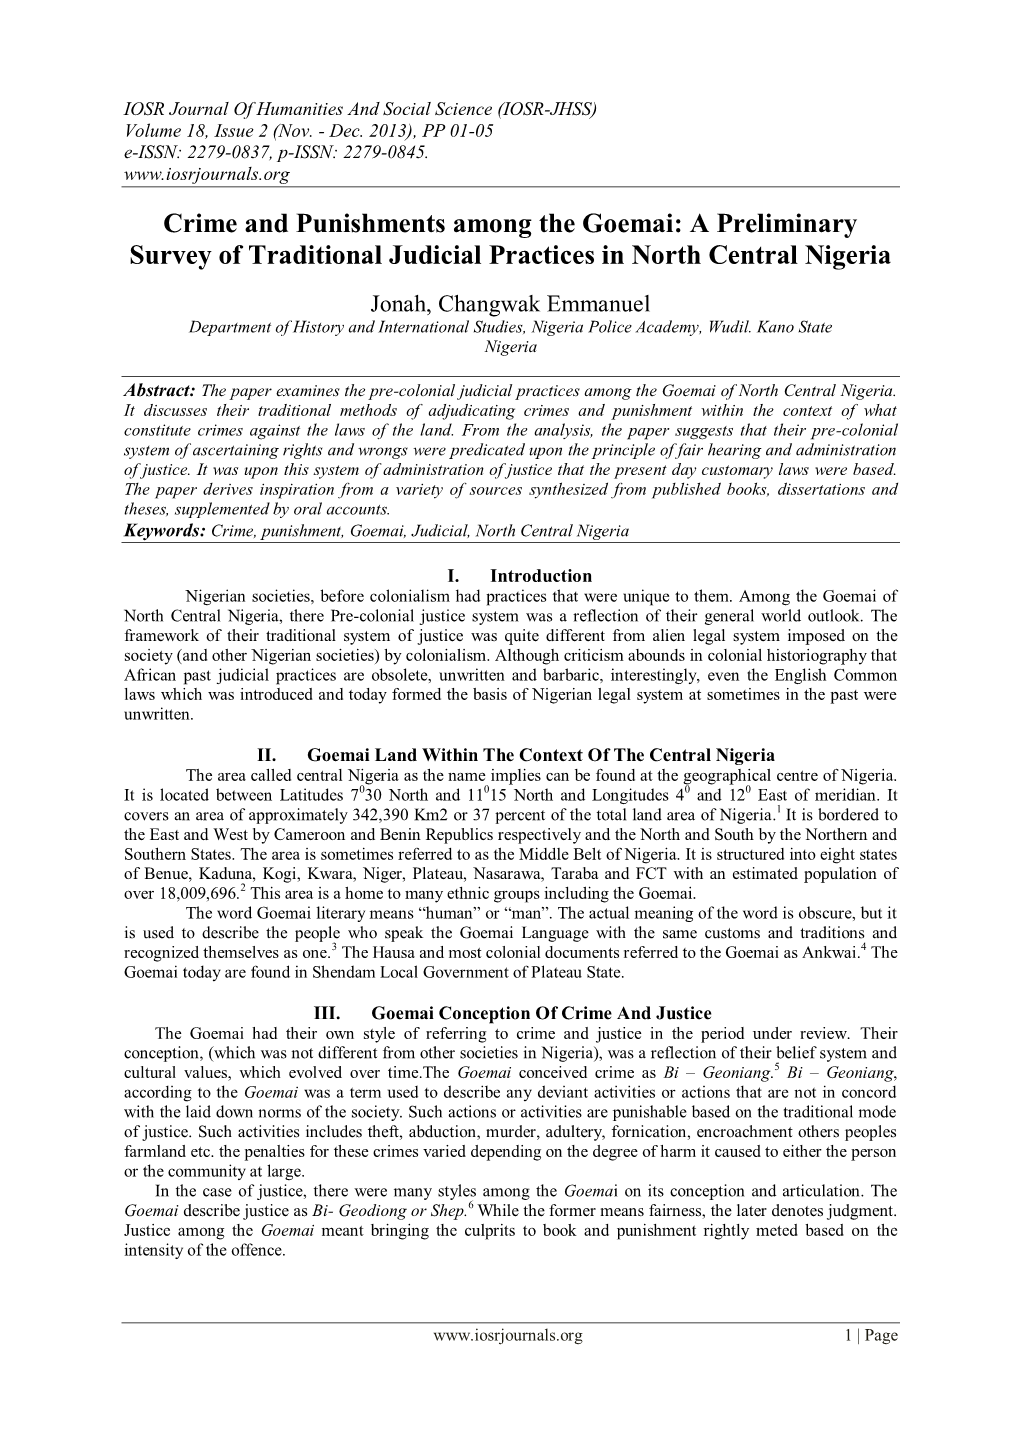 Crime and Punishments Among the Goemai: a Preliminary Survey of Traditional Judicial Practices in North Central Nigeria